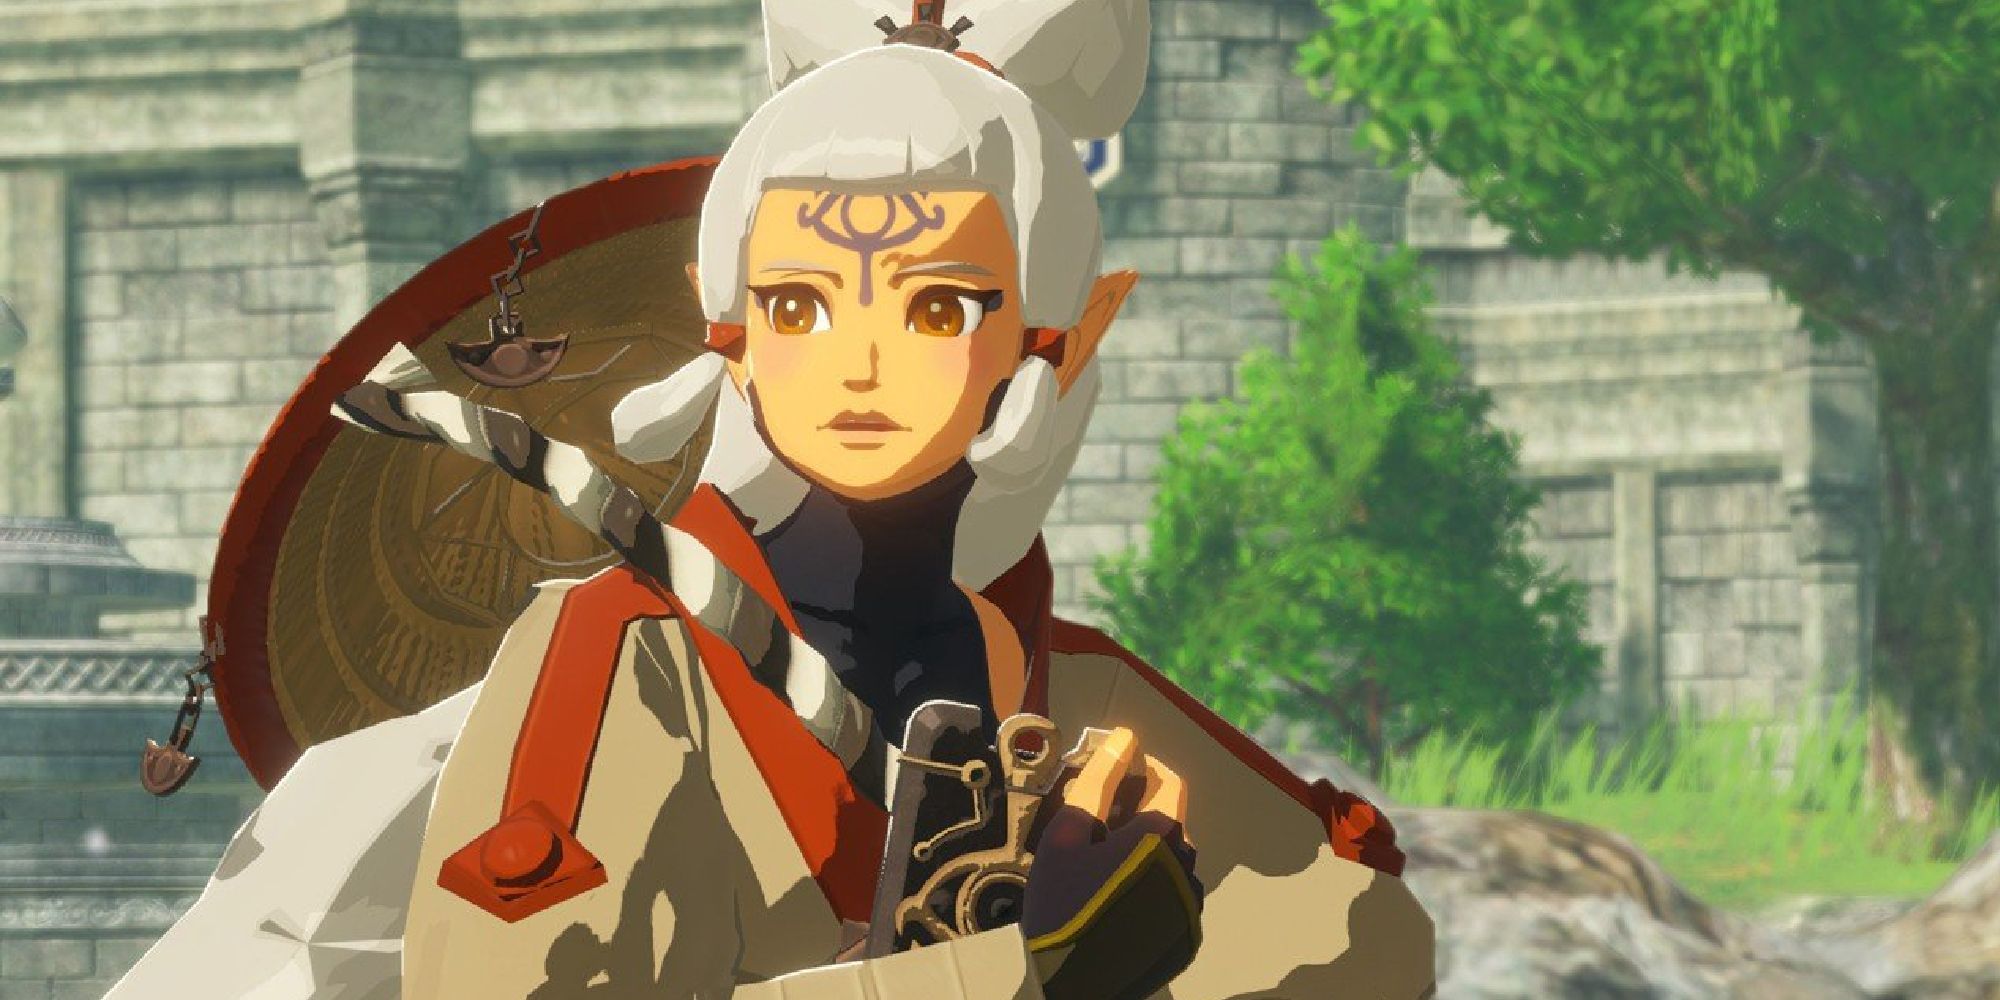 A worried Young Impa as she appears in Hyrule Warriors Age of Calamity